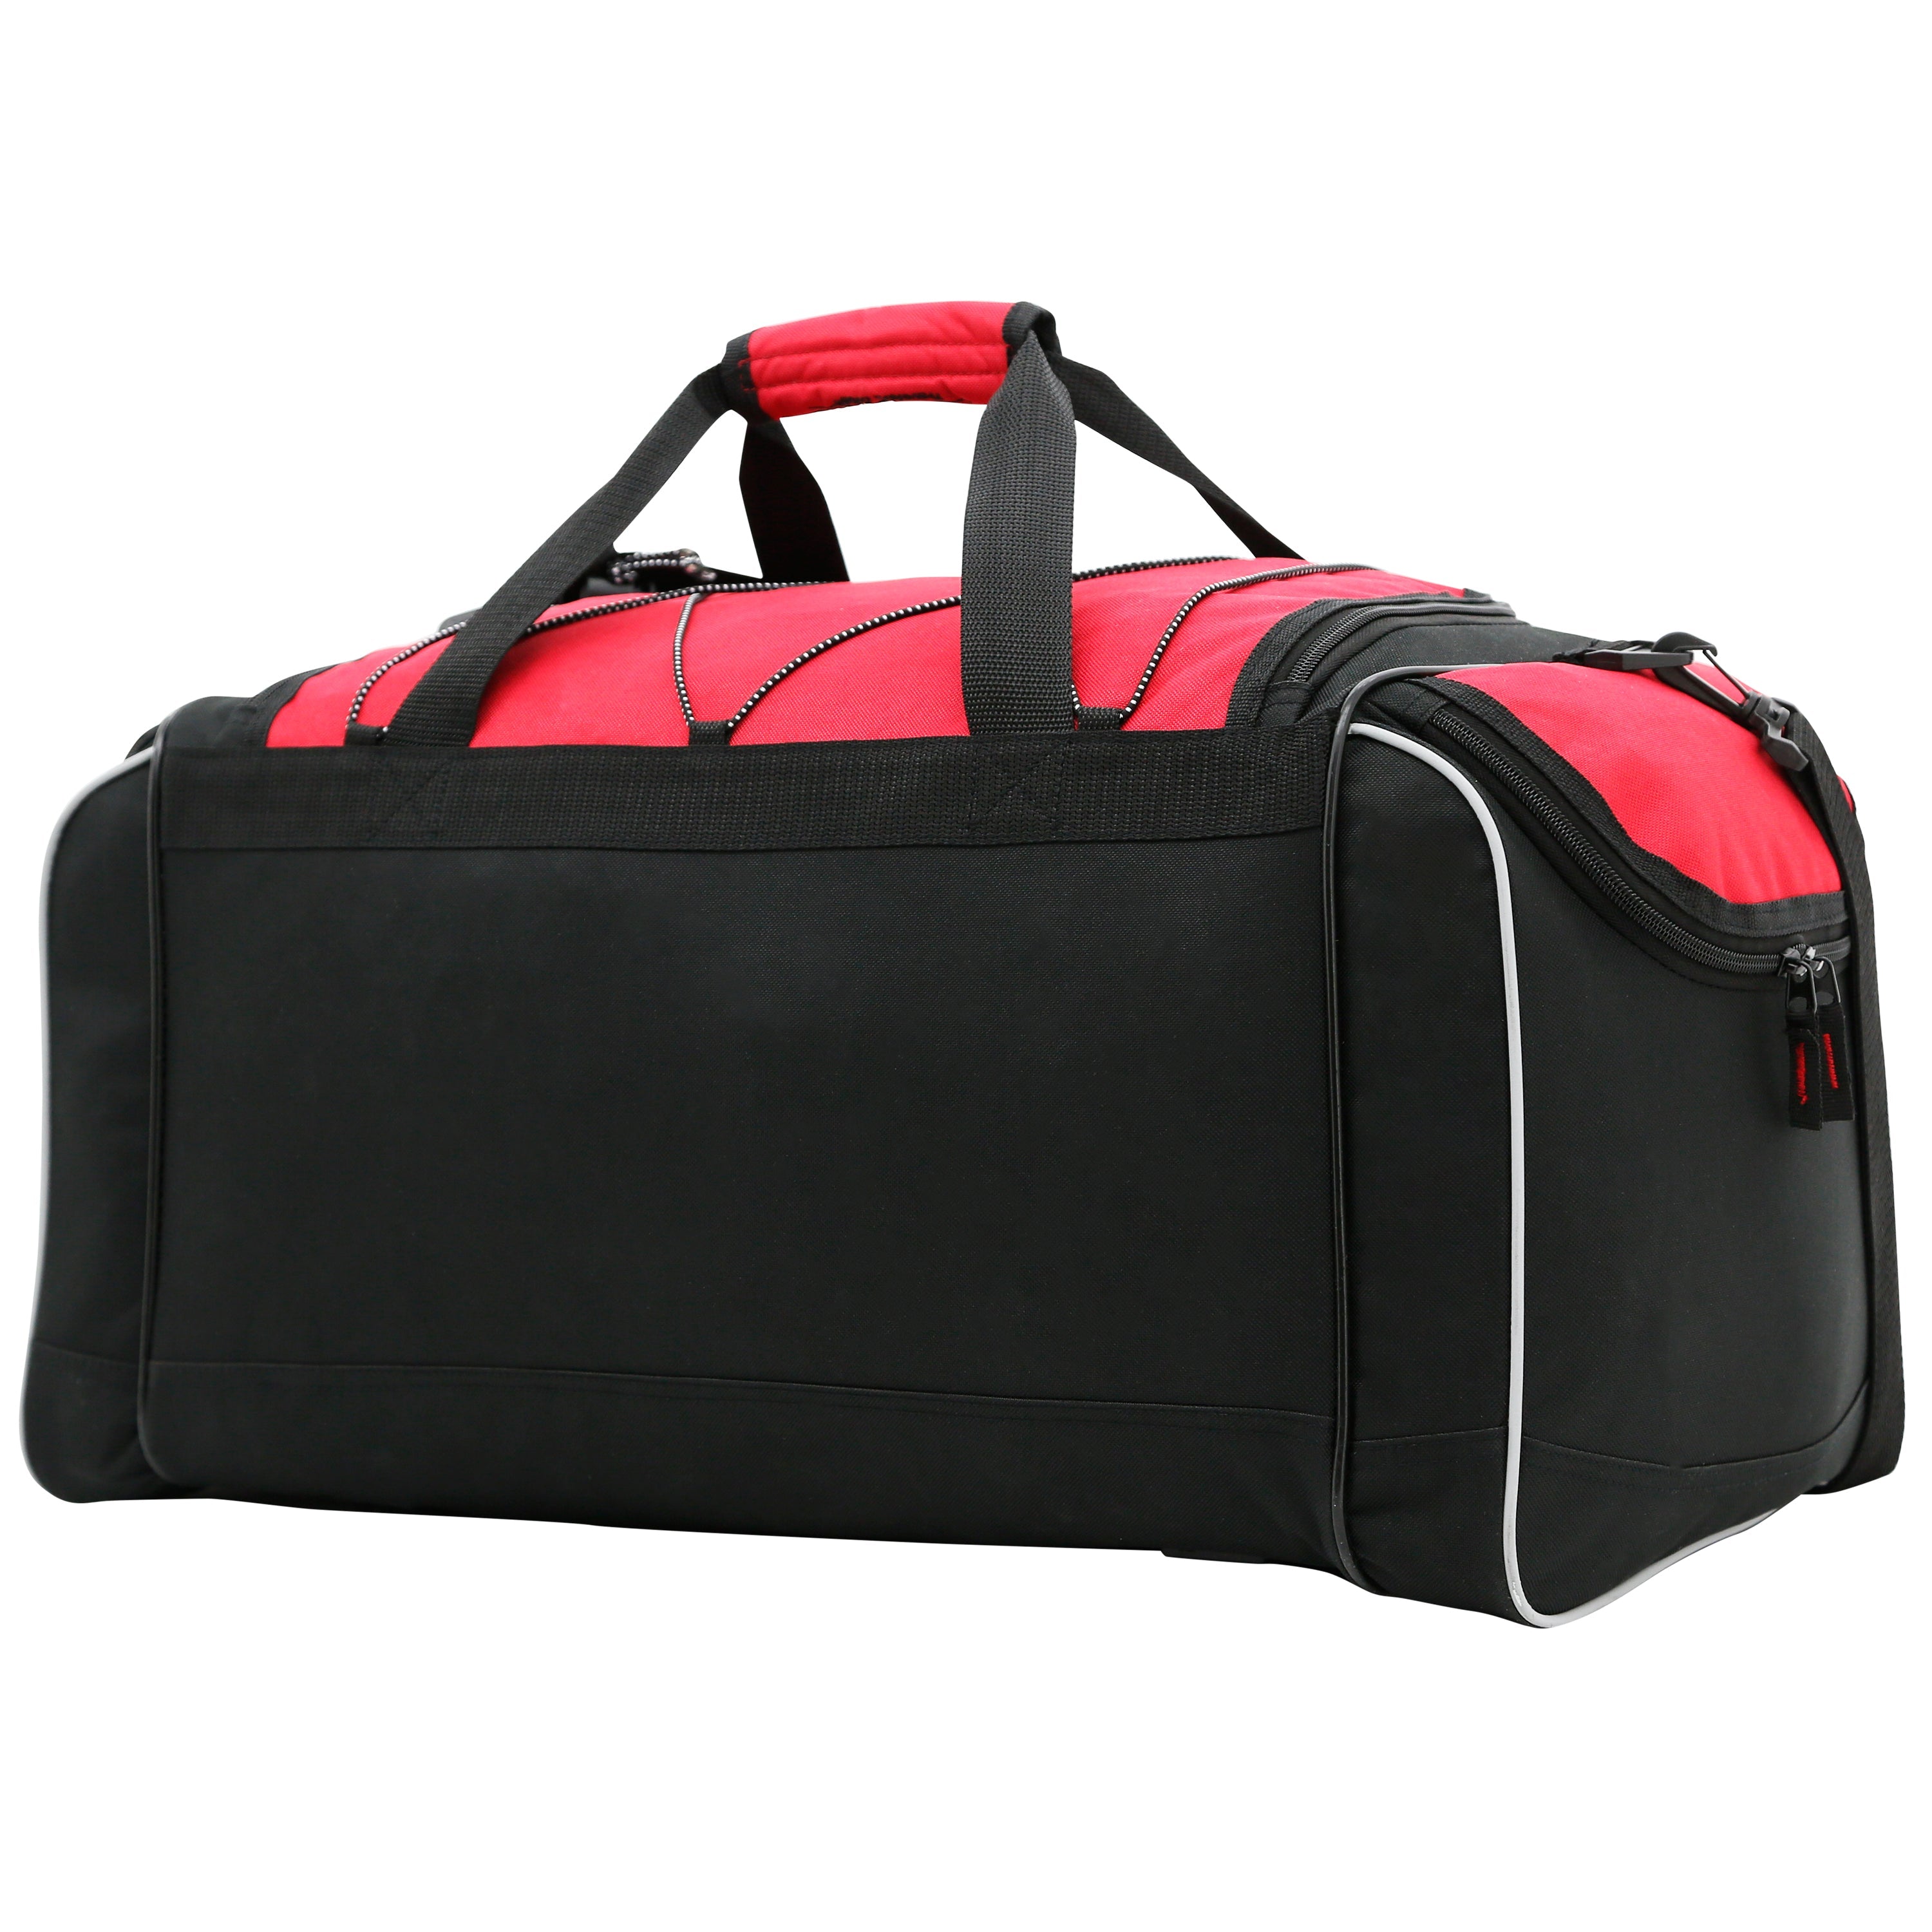 Travelers Club 24Inch ADVENTURE Travel and Outdoor Duffel